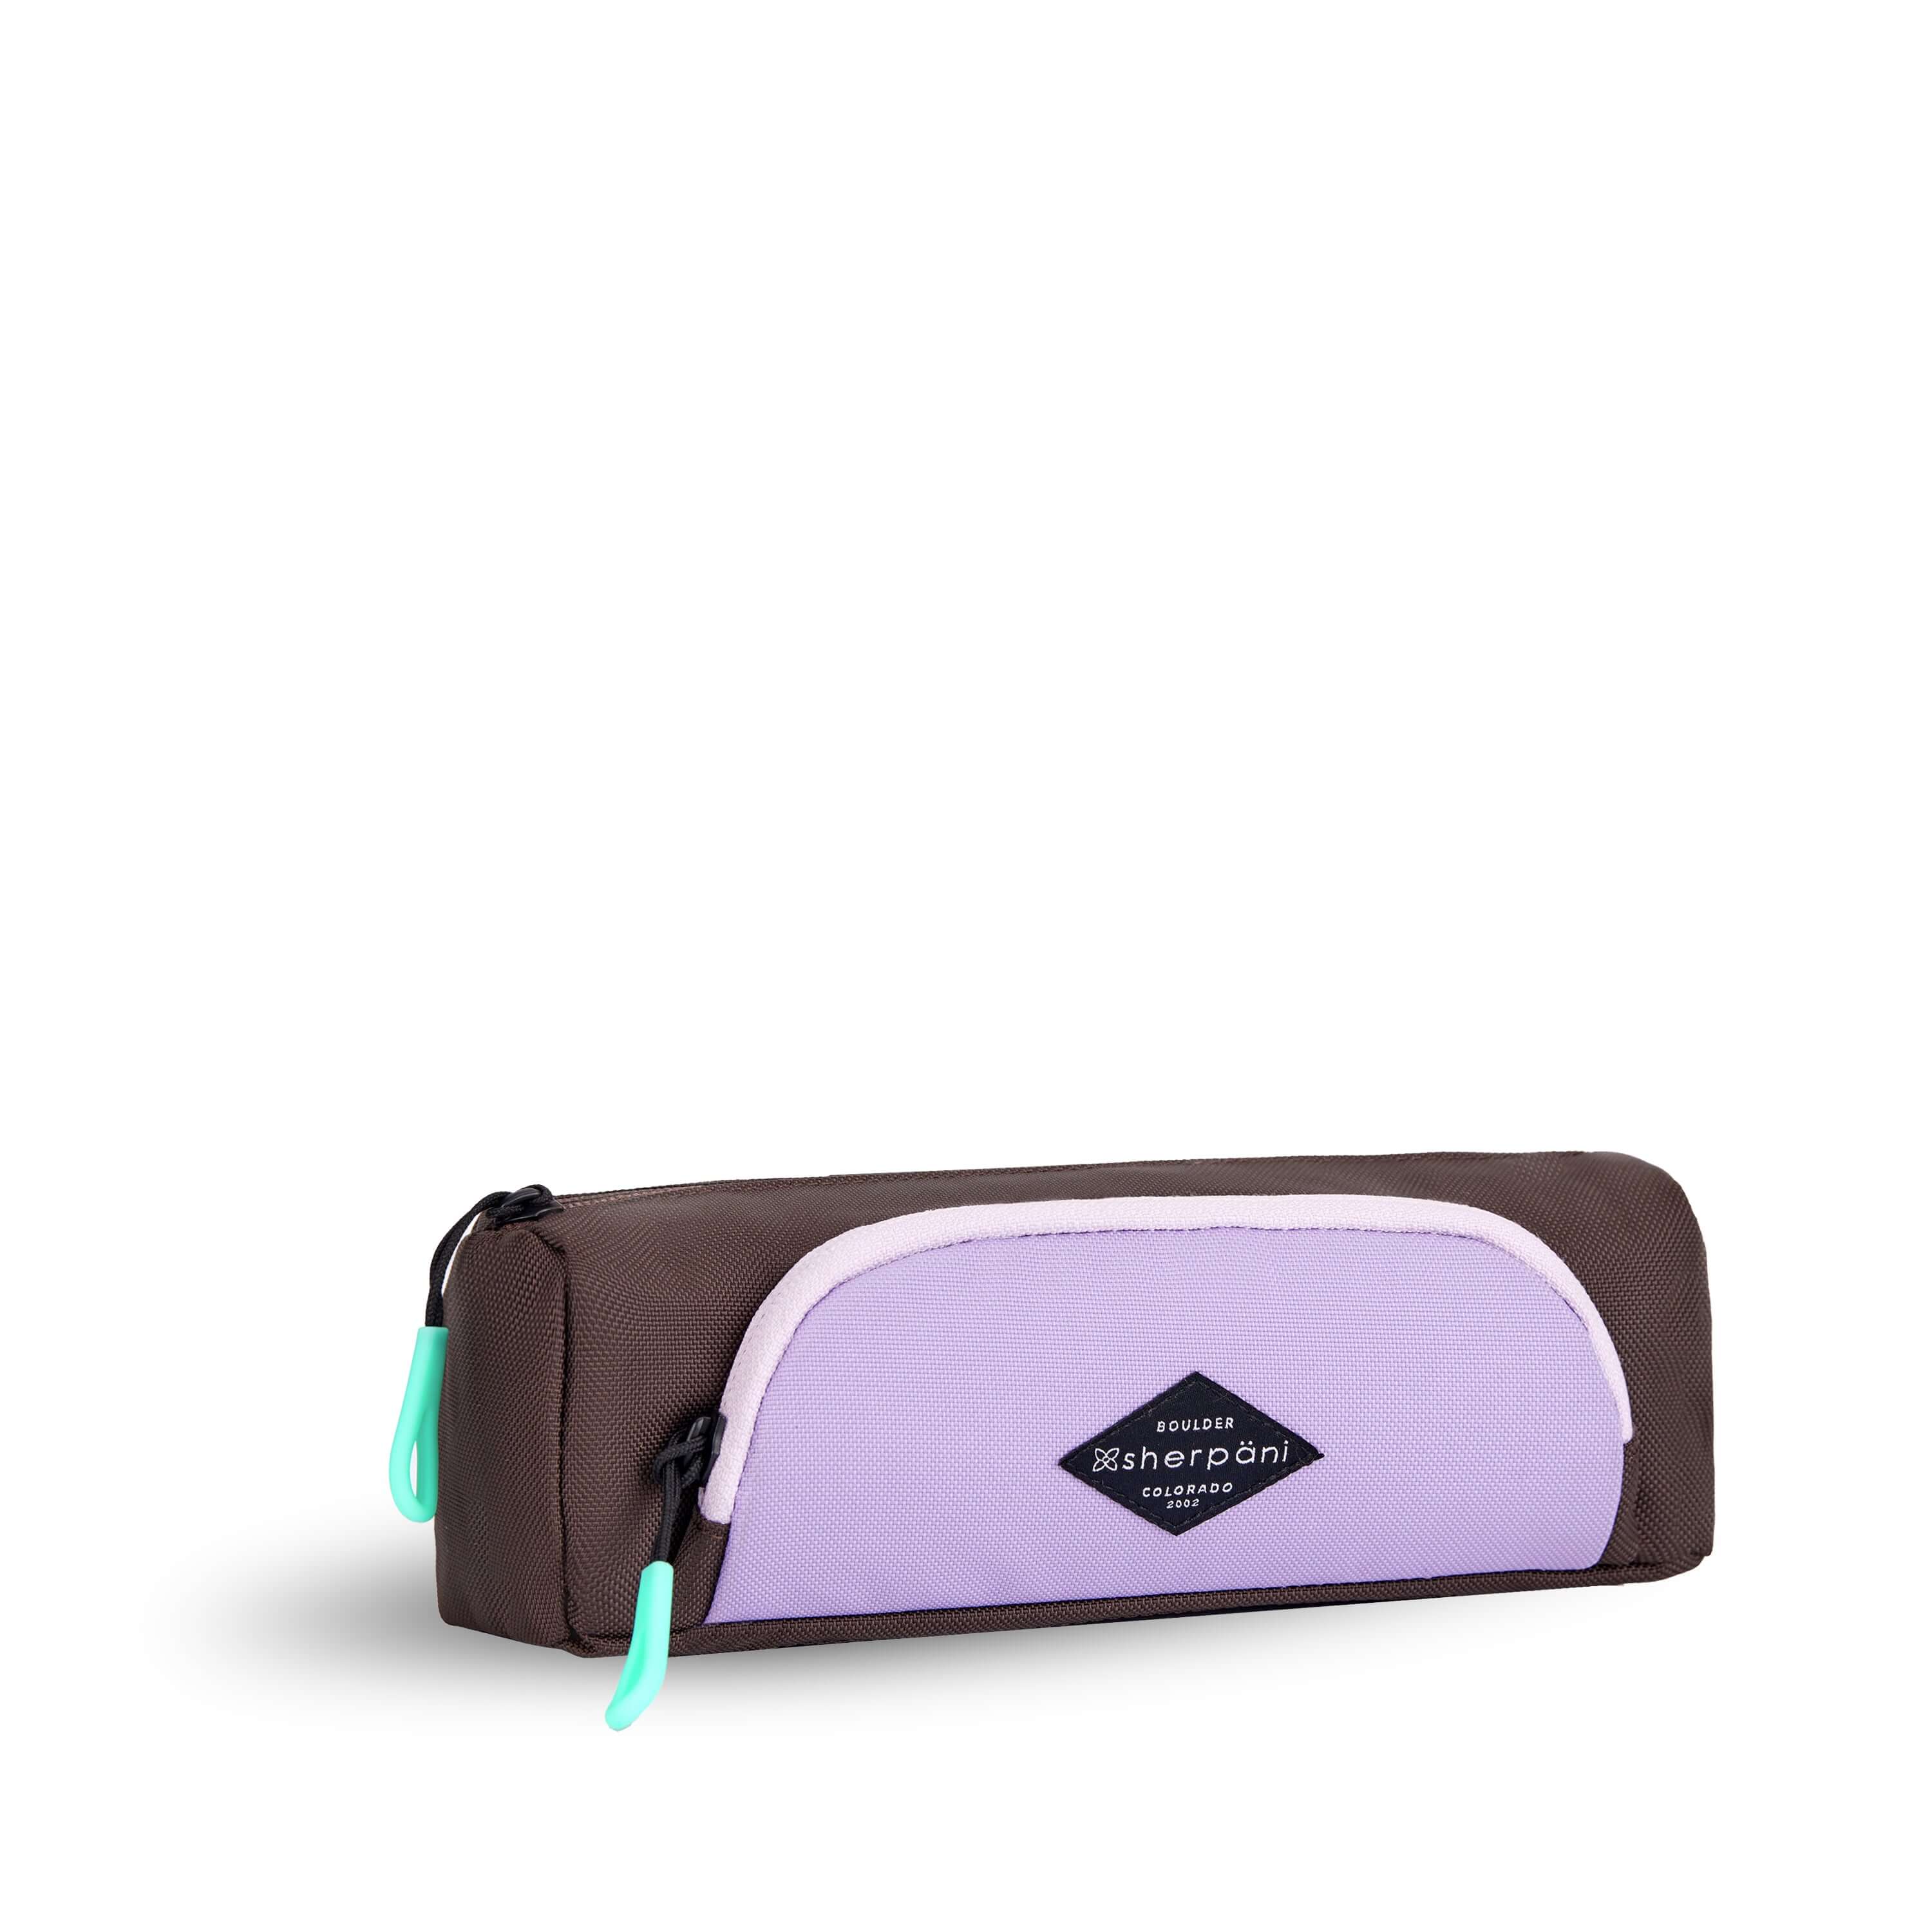 Angled front view of Sherpani travel accessory, the Poet in Lavender. The pouch is two-toned in lavender and brown. There is an external zipper pocket on the front. Easy-pull zippers are accented in aqua.